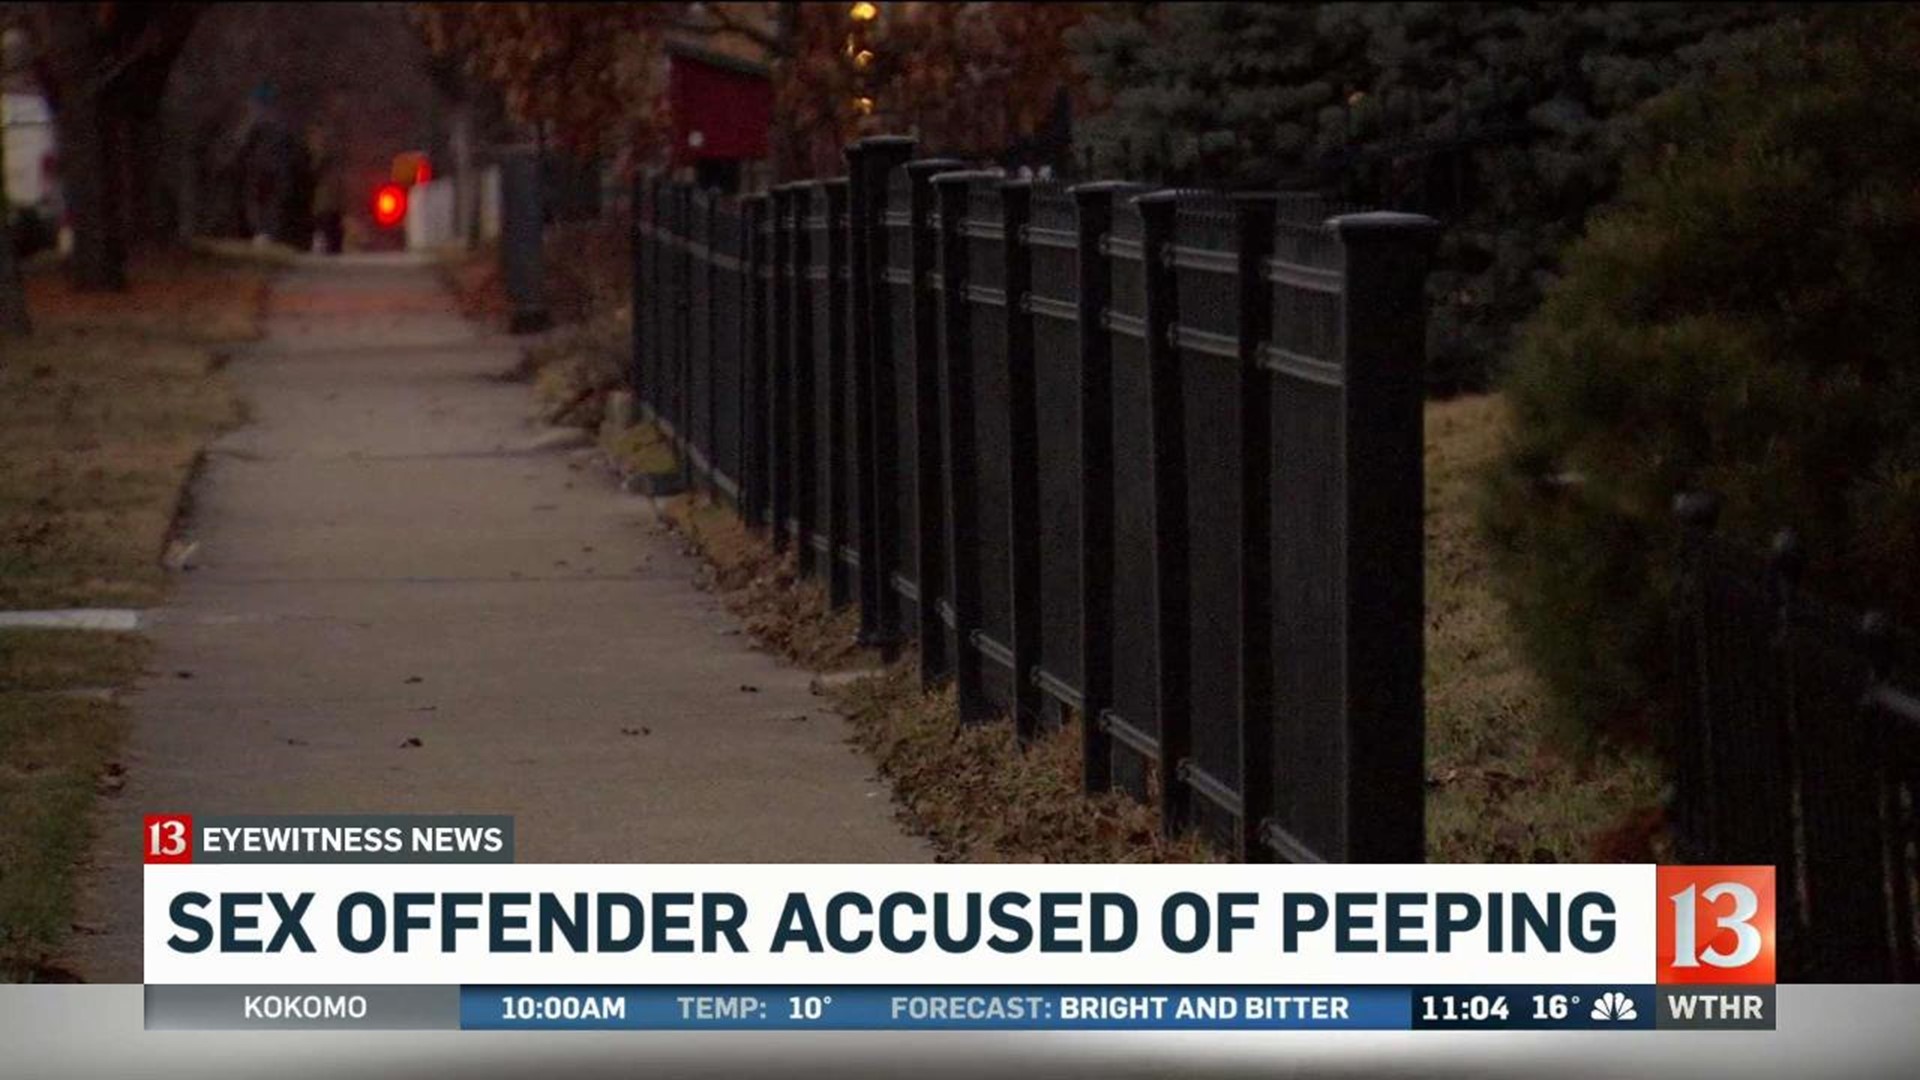 Fed up with repeated peeping incidents, neighbors help police track down suspect wthr